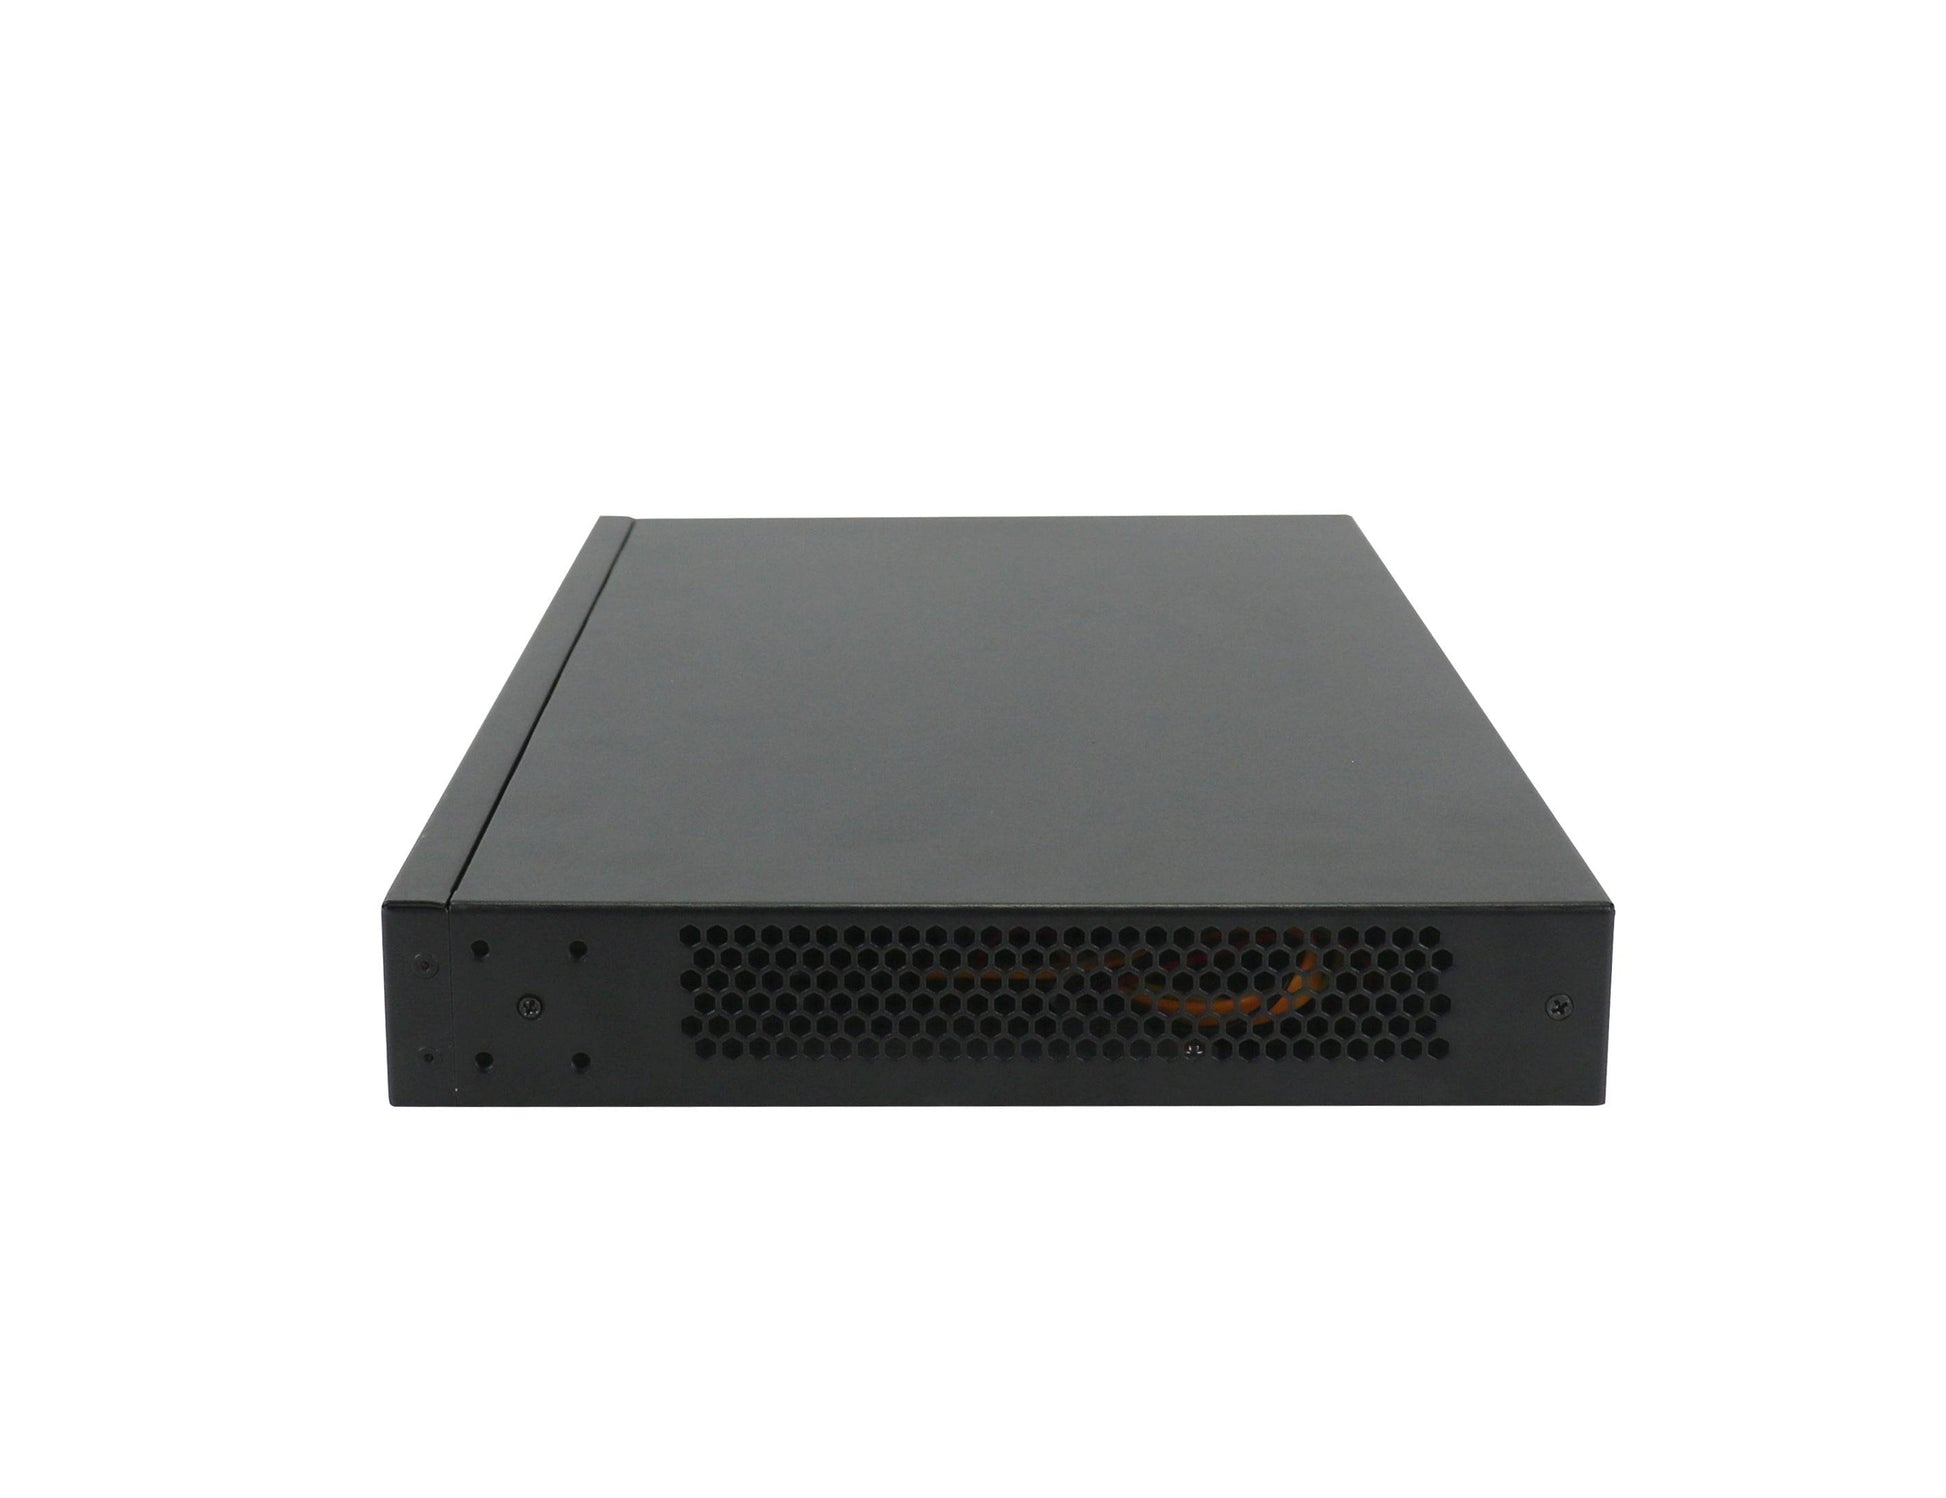 SecPoint Penetrator S9 - 8 IP Concurrent Scan License Vuln Scanning Appliance (3 Years License) - SecPoint